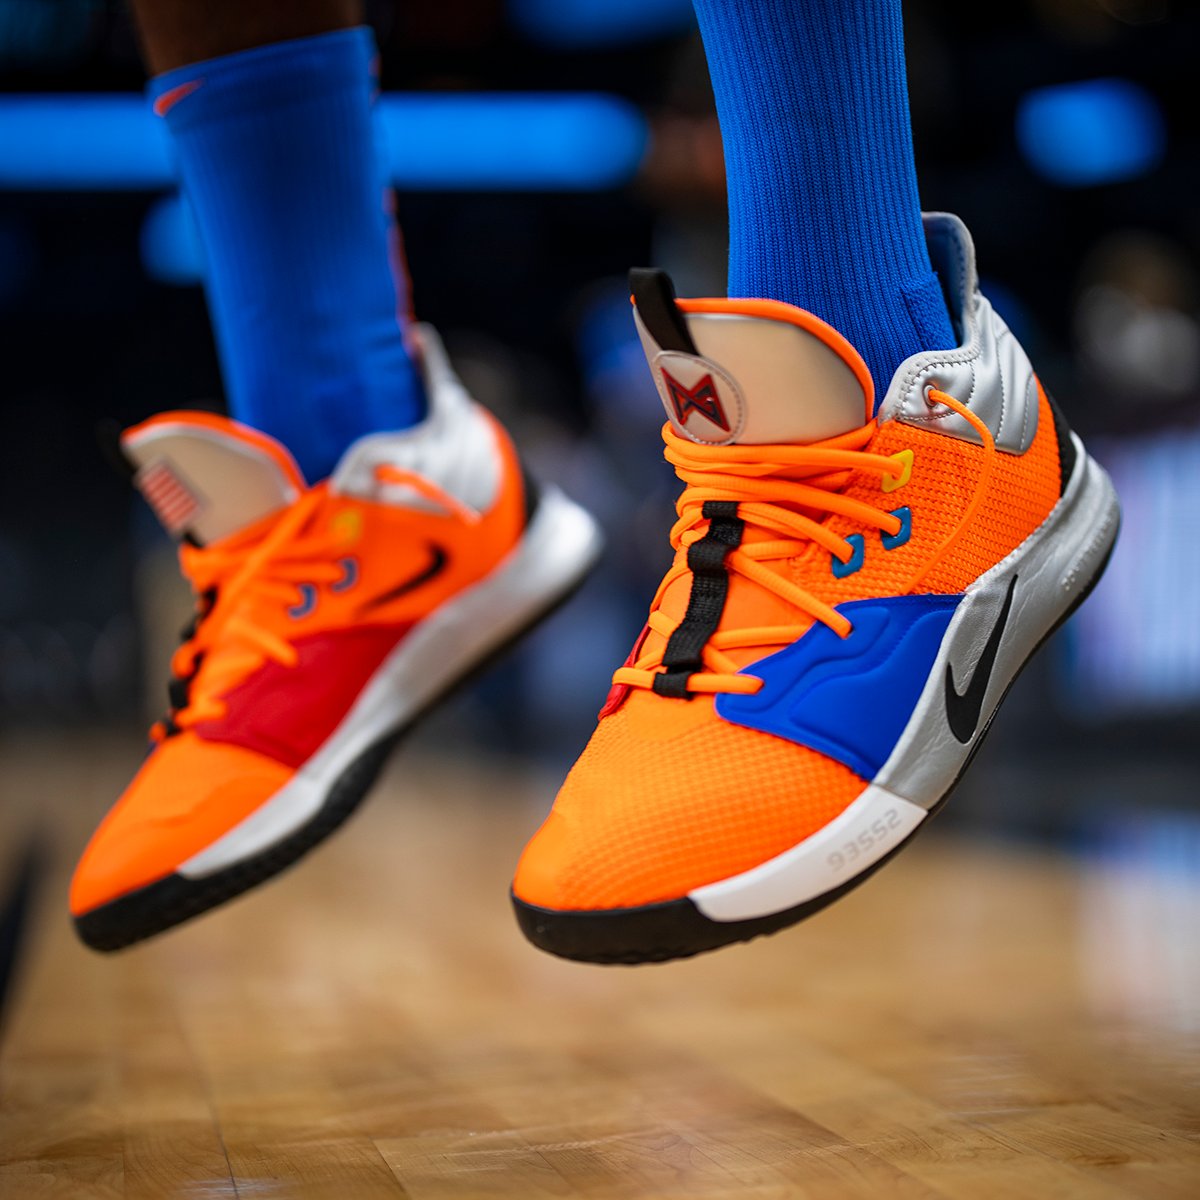 RING KNOWS RING: NIKE PG 3 EP Performance Review